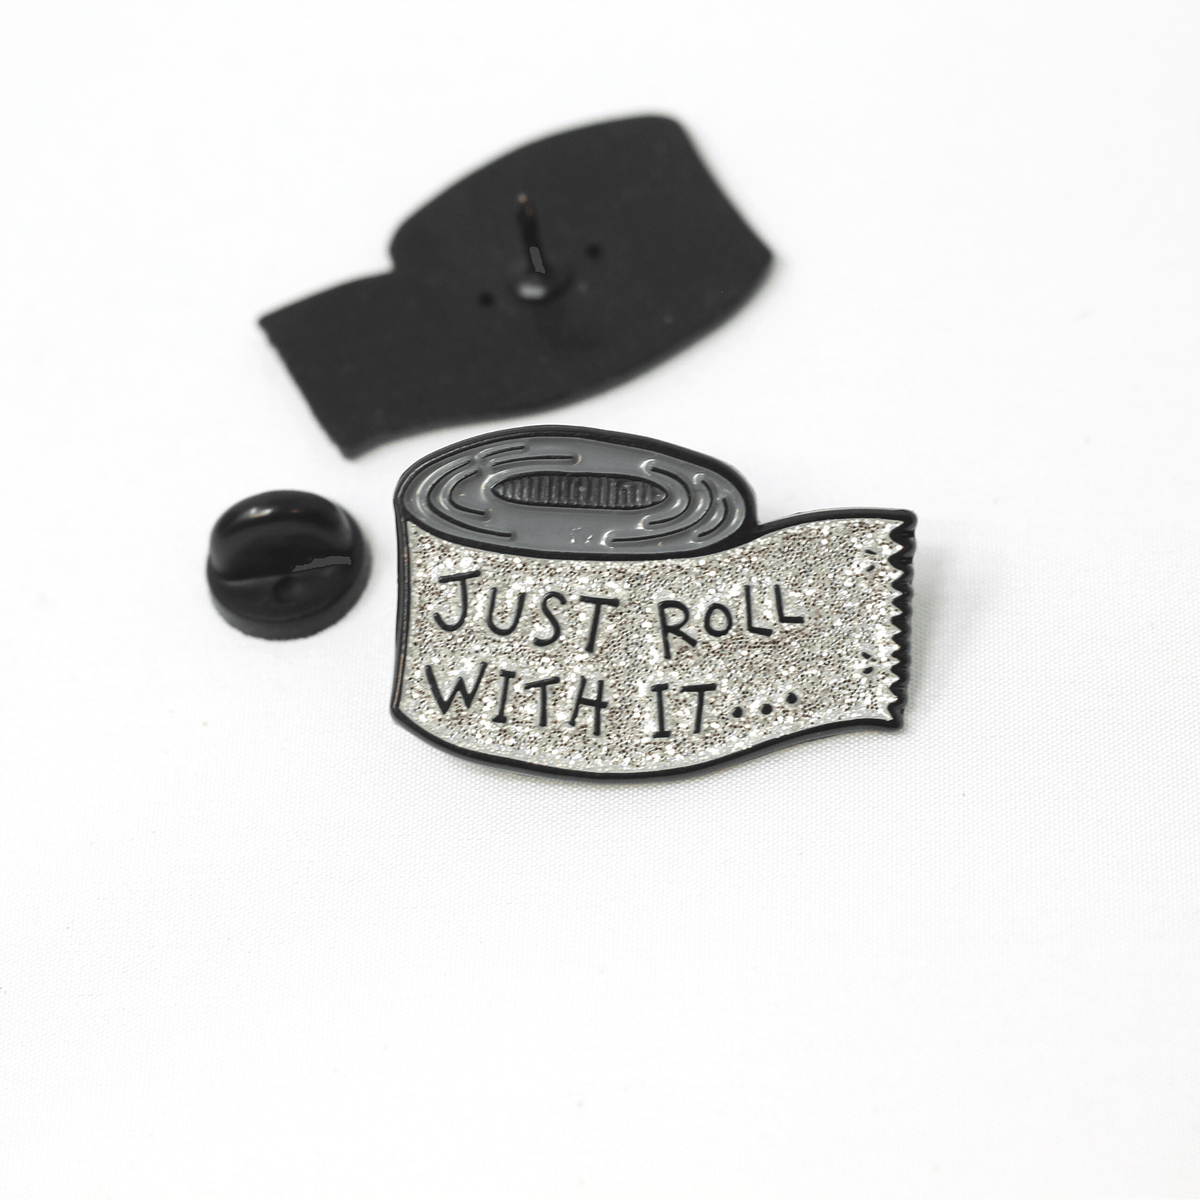 Just Roll With it Duct Tape Enamel Pin - Wild | Life Outdoor Adventures